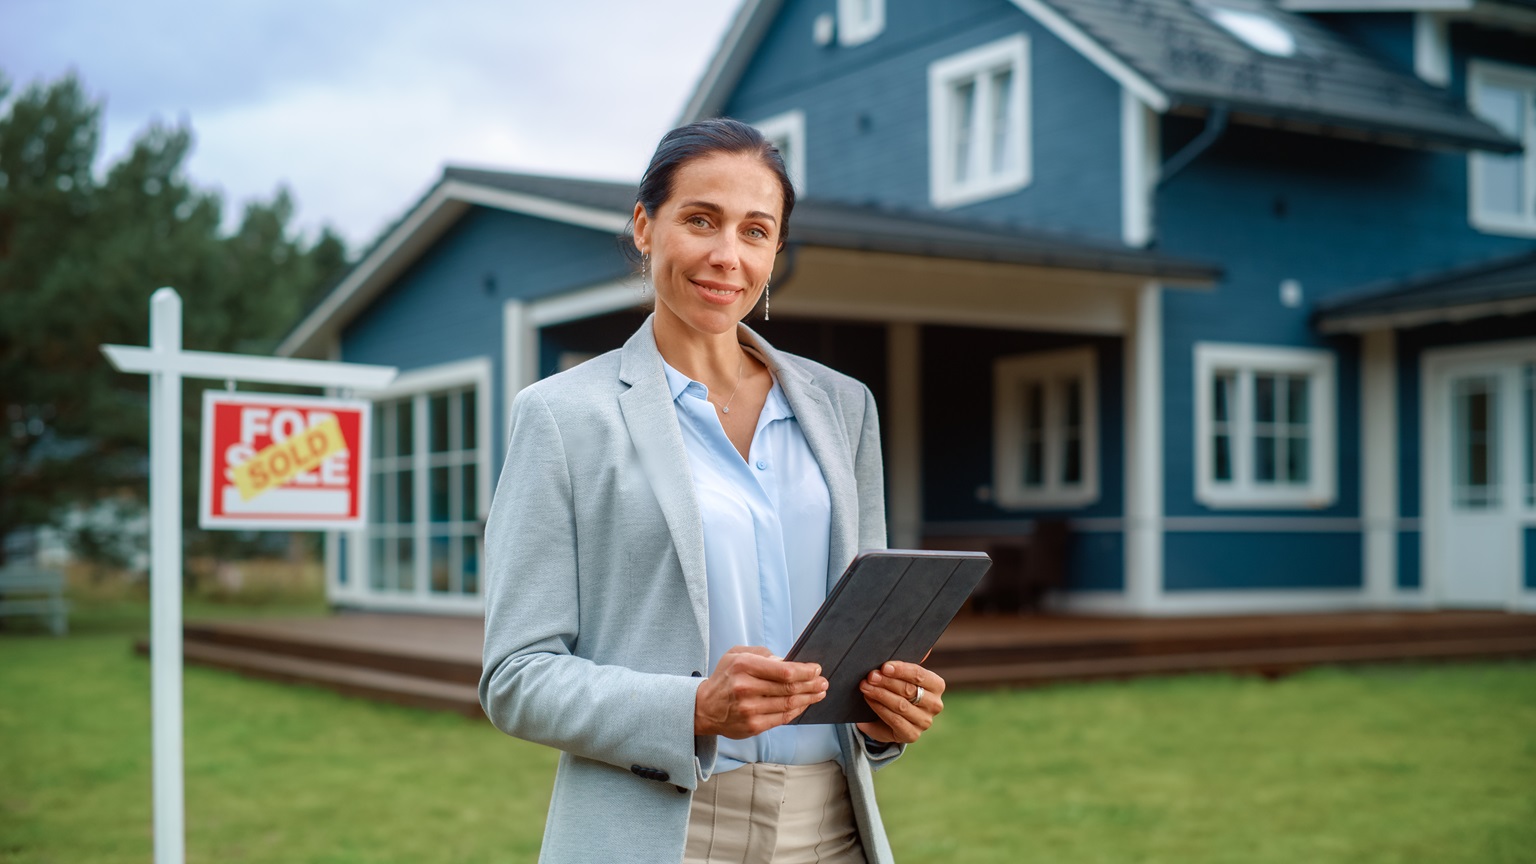 Building Dreams: Real Estate Agencies and the Path to Homeownership